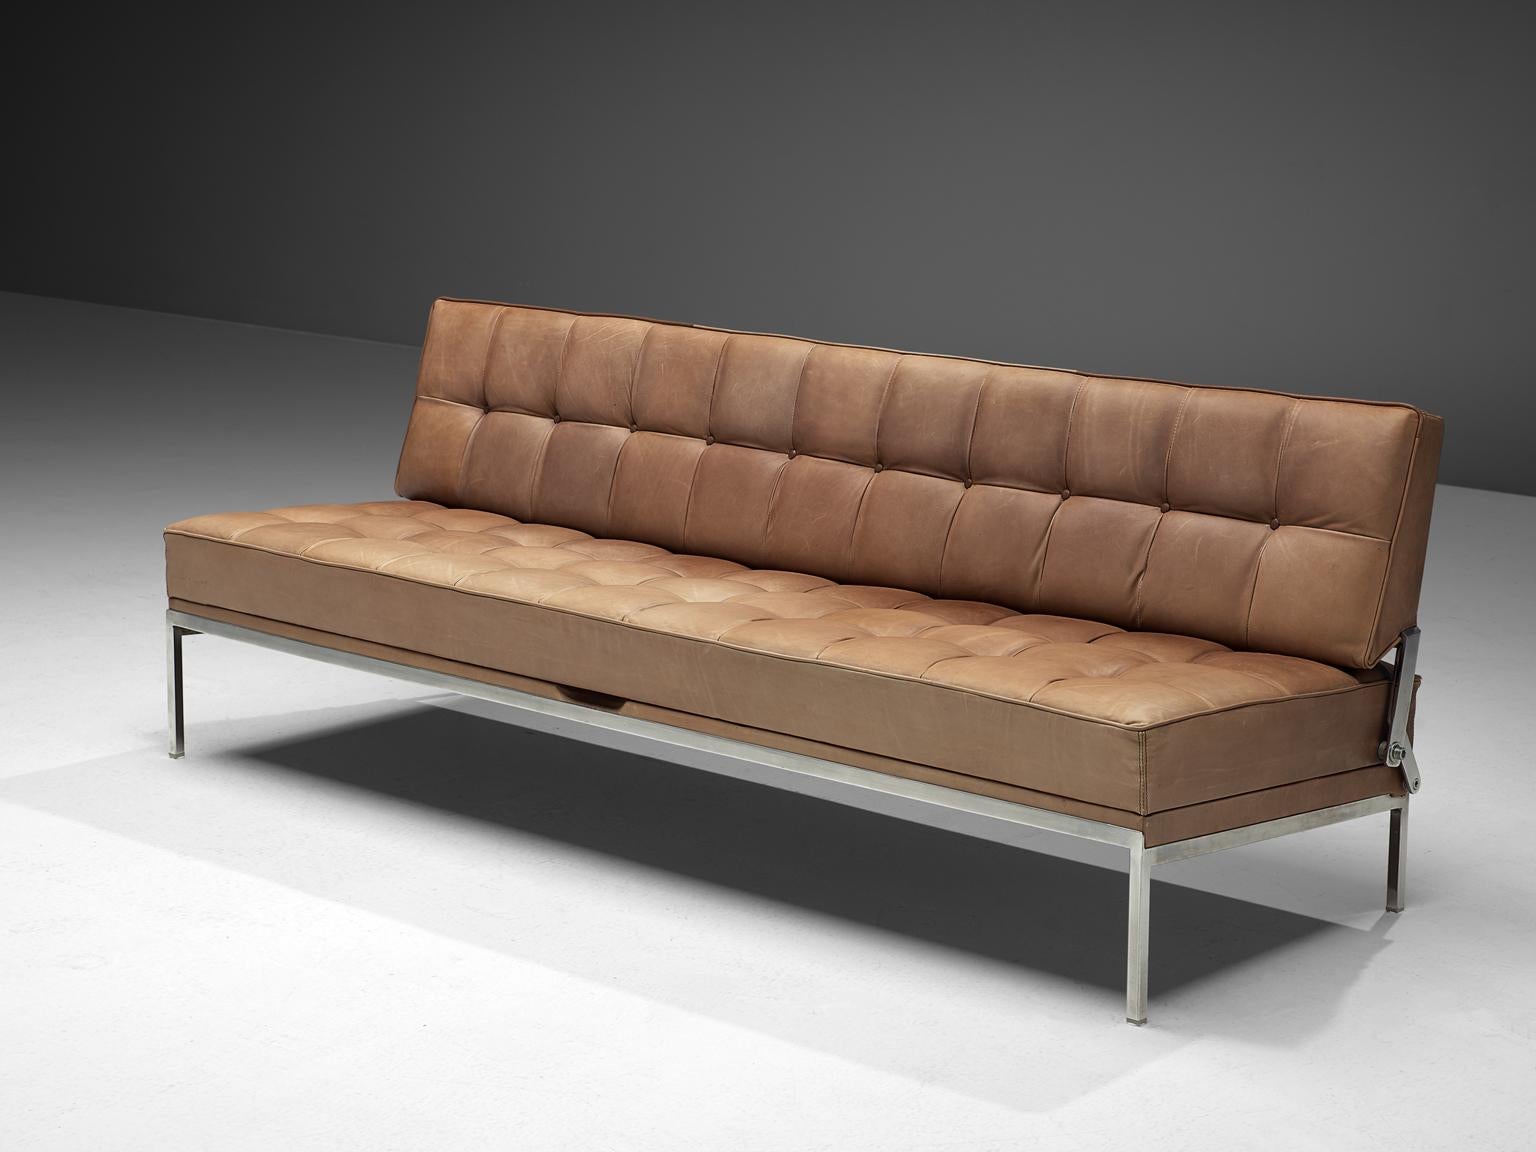 Johannes Spalt for Wittmann, 'Constanze' daybed or sofa, beige leather, brushed steel, Austria, 1960s. 

This Austrian daybed named is typical for Mid-Century Modern design from Austria. The tufted leather seat and back is constructed with the